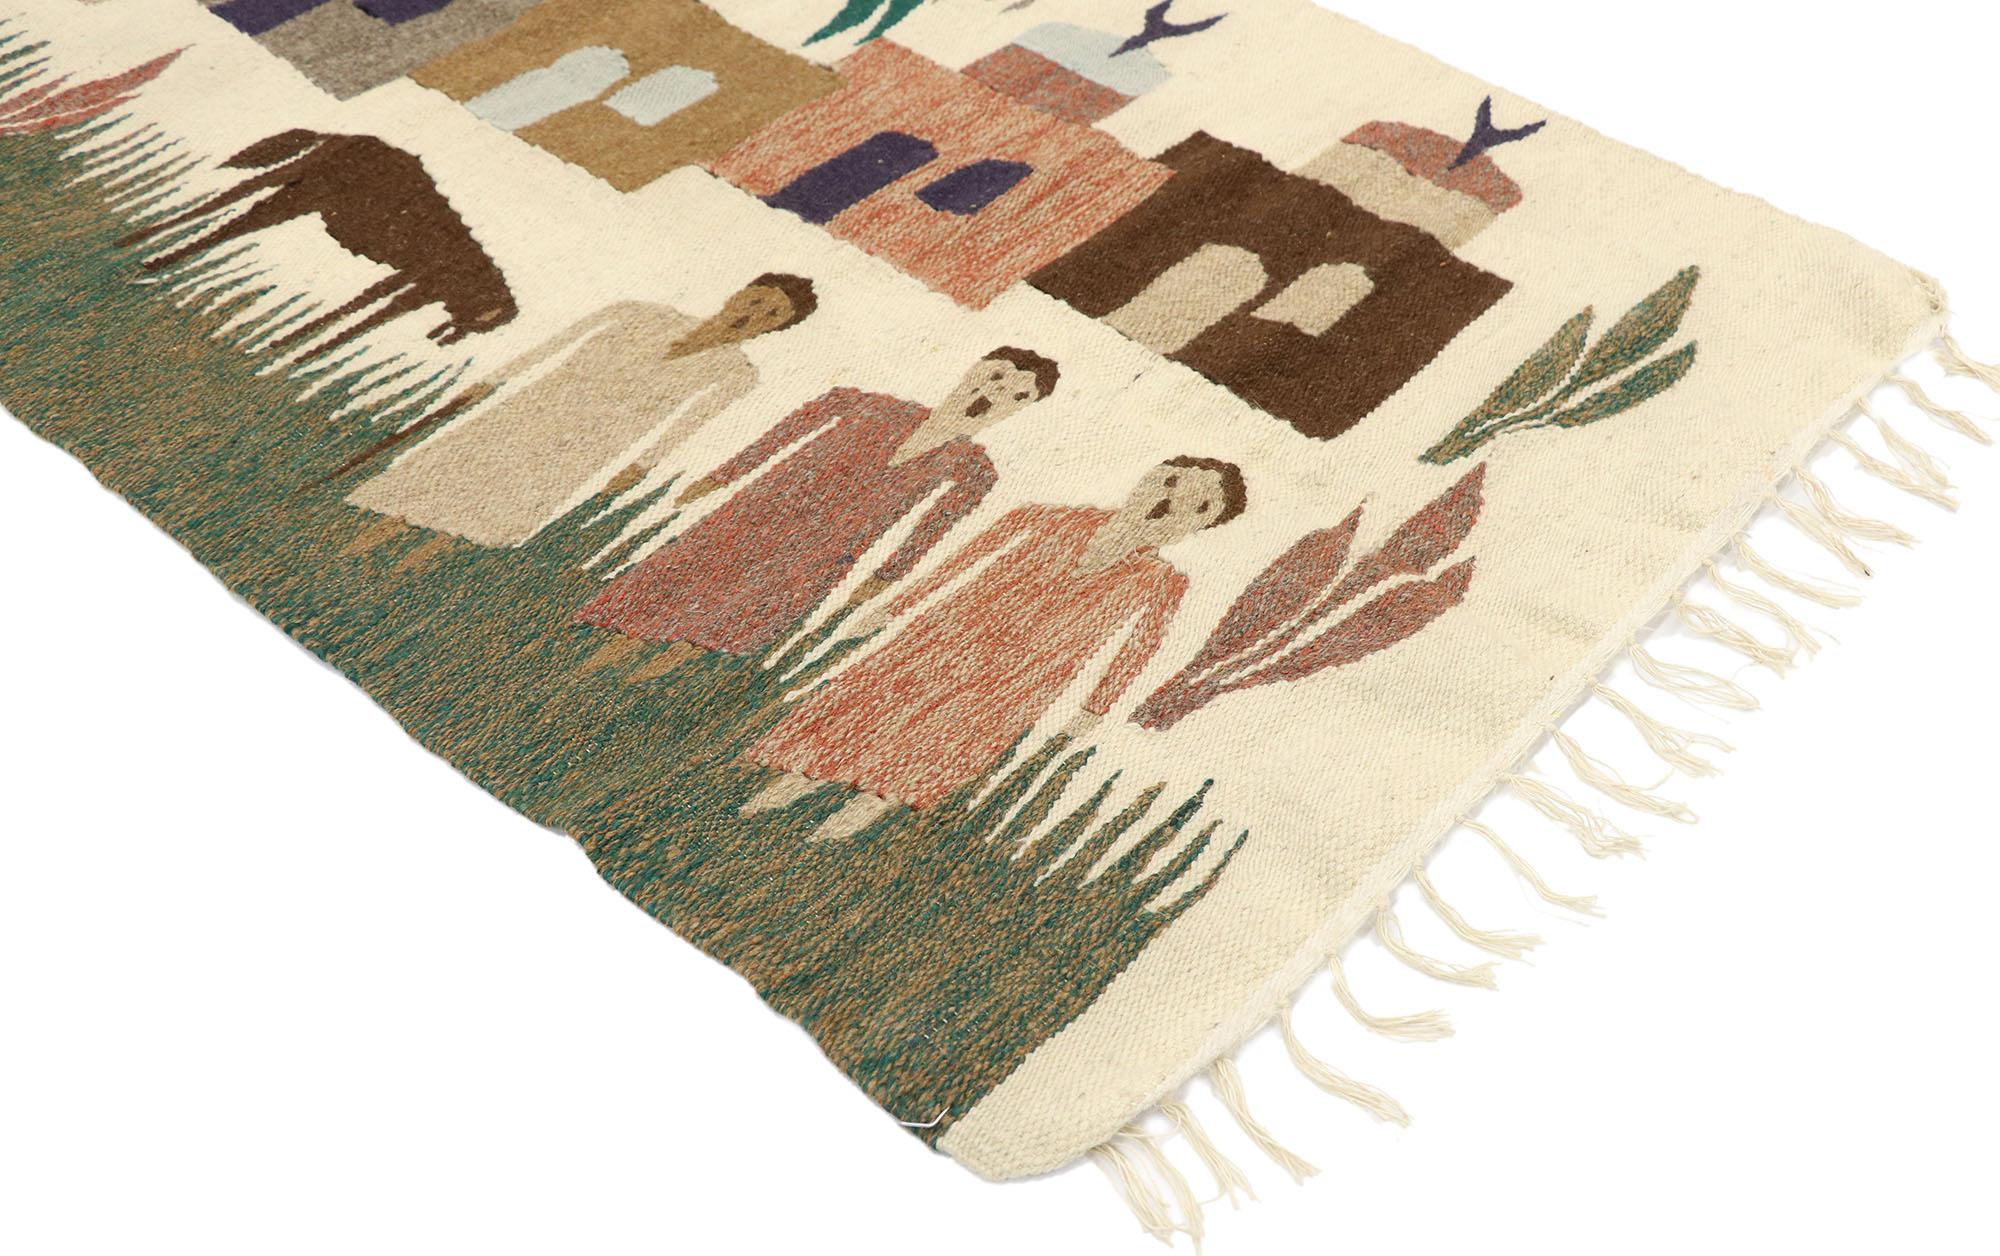 77599 Vintage Ramses Wissa Wassef Egyptian wool tapestry. Reminiscences of an exotic journey and Folk Art charm, this hand-woven wool vintage Egyptian kilim tapestry is a captivating vision of woven beauty. The abrashed beige field depicts a village